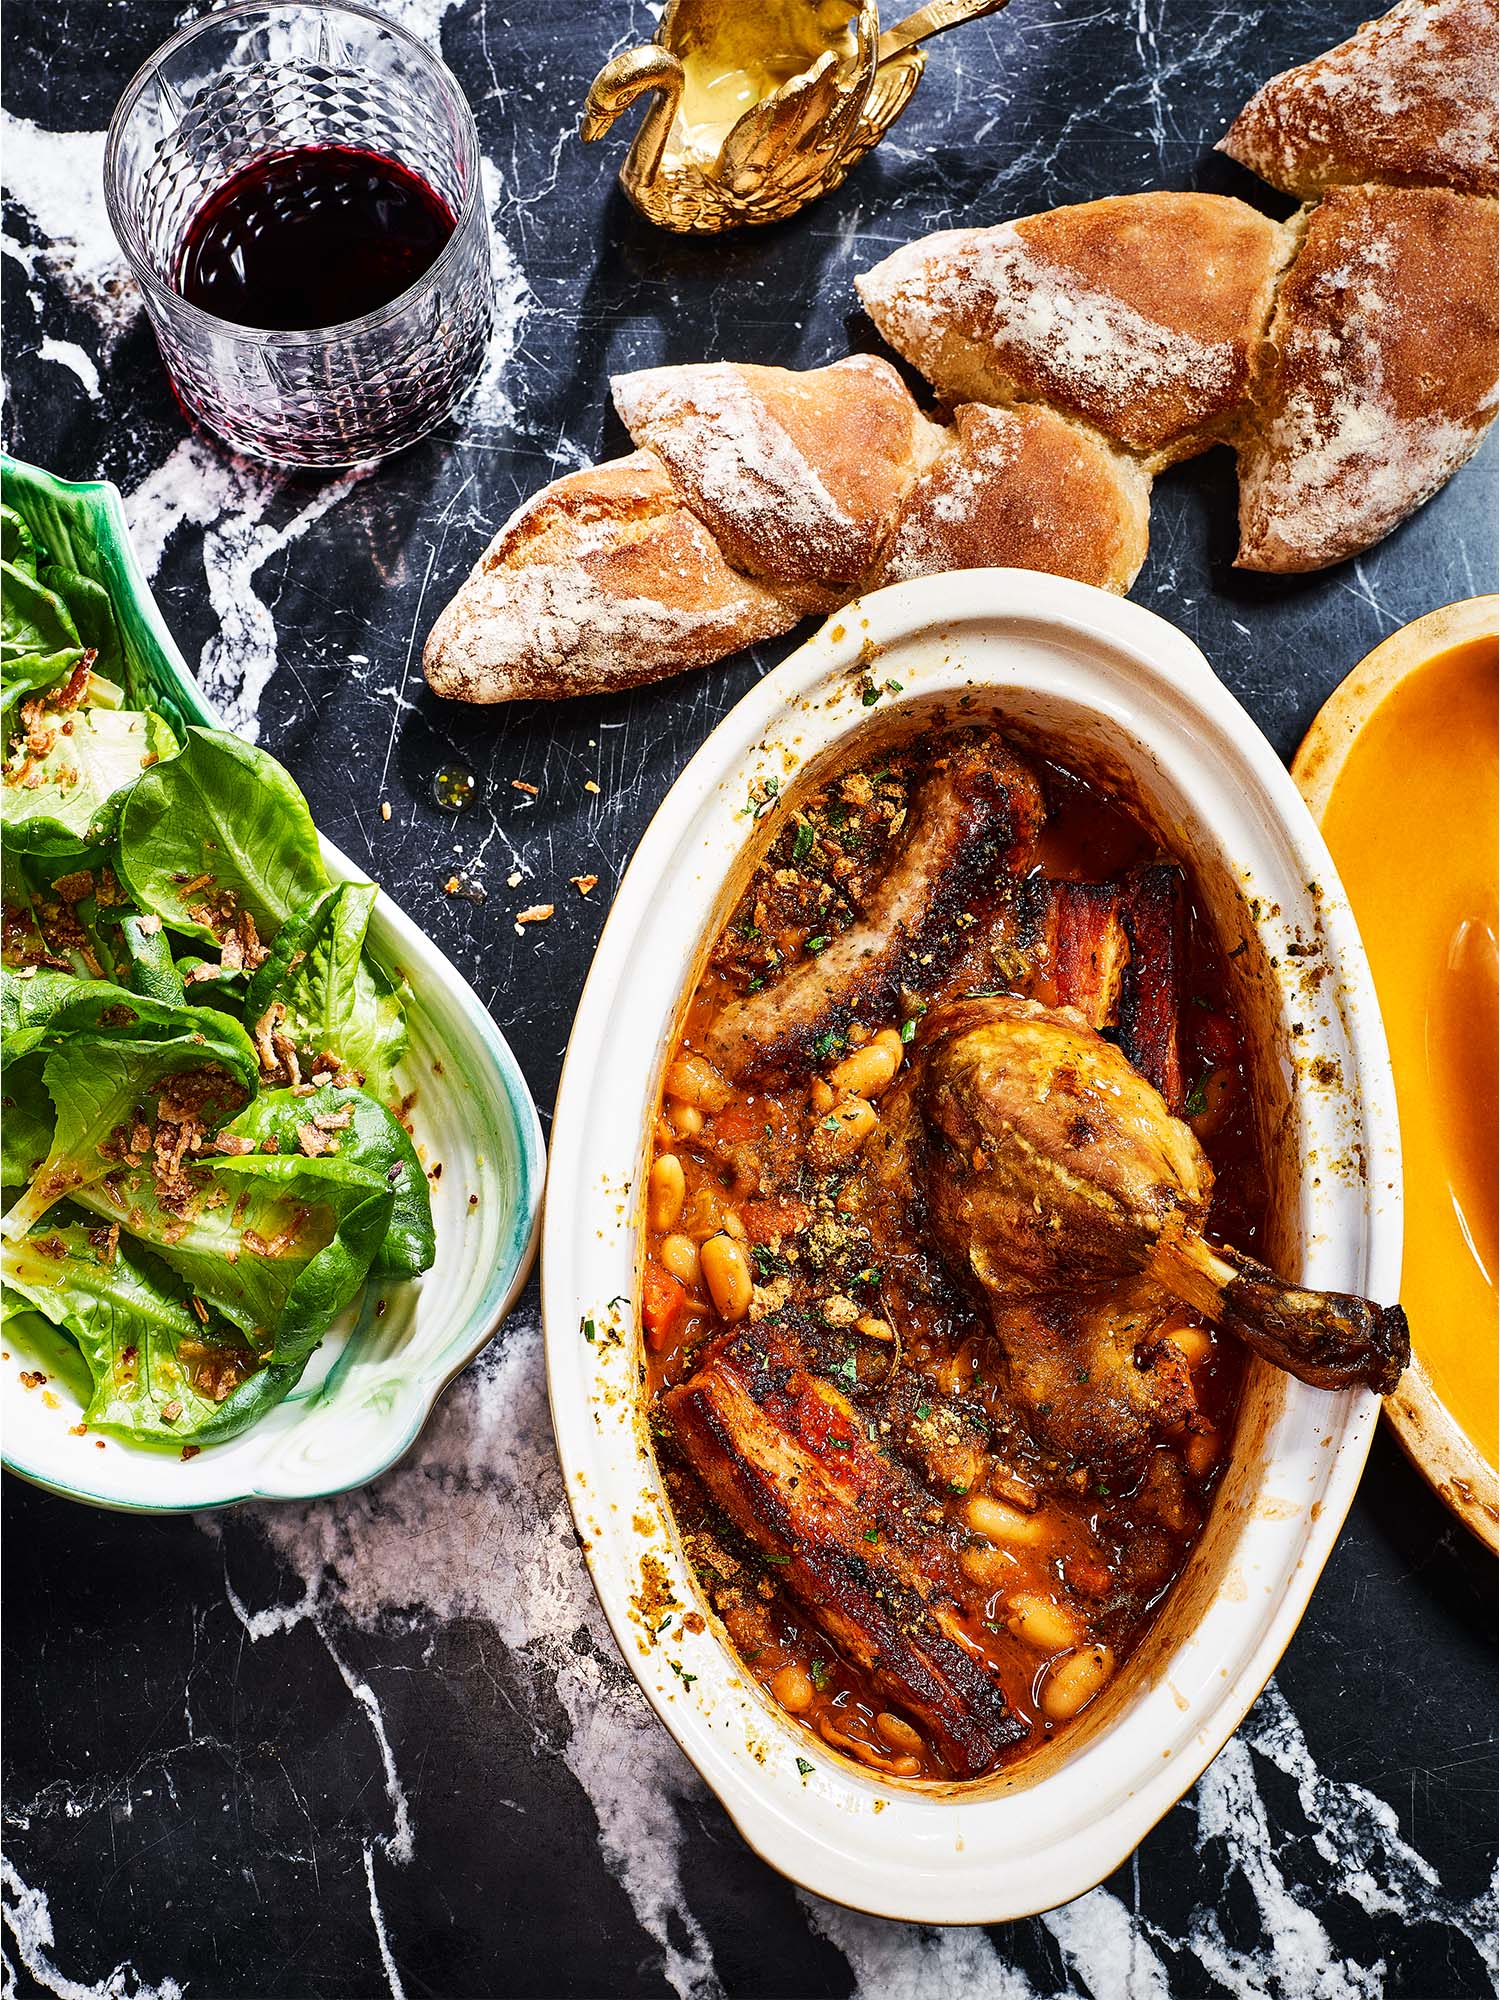 Duck Cassoulet Meal for 4 - SPRING SALE